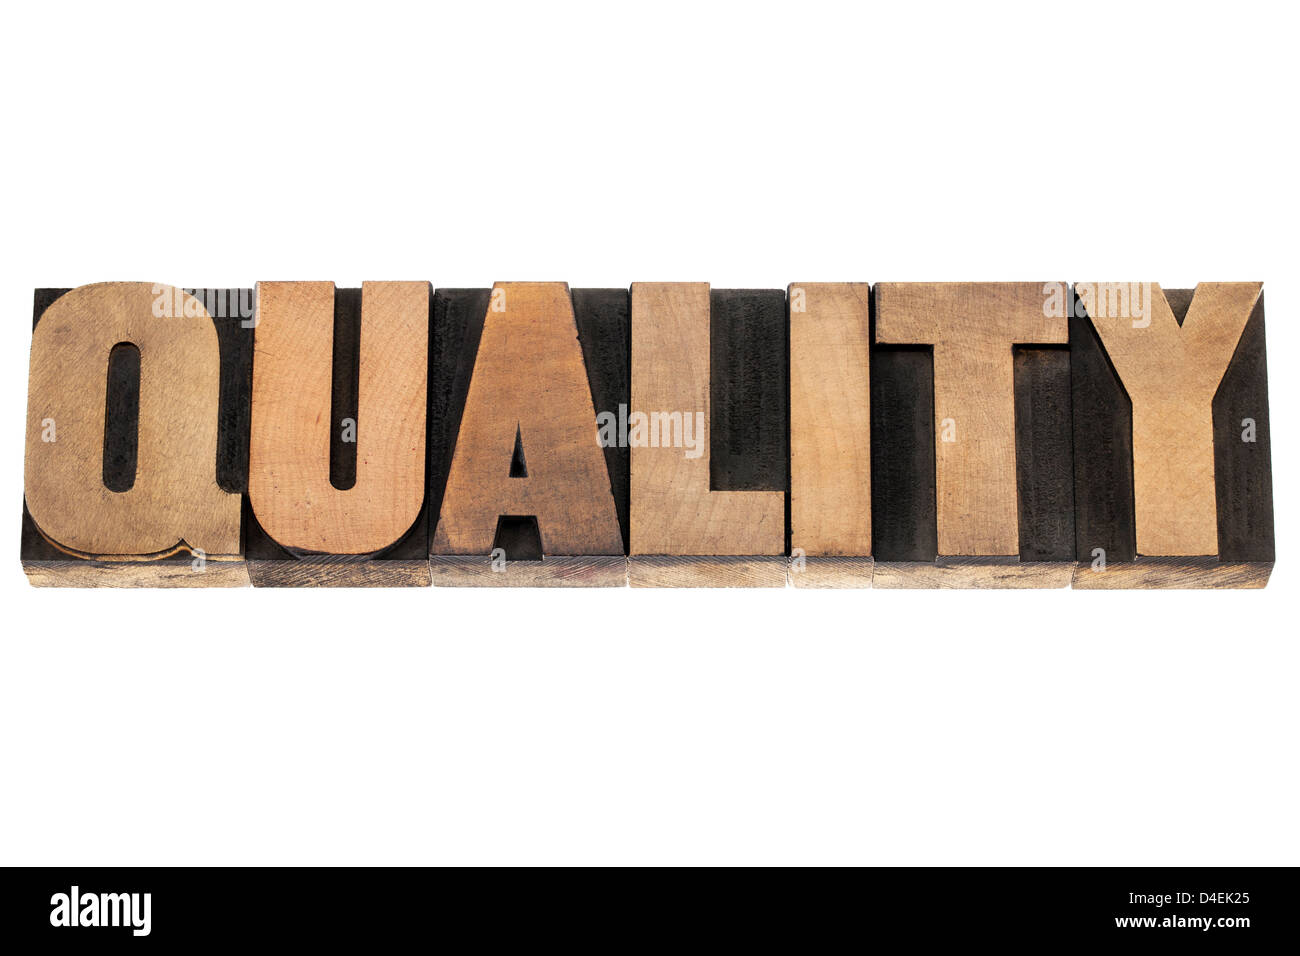 quality - business concept - isolated word in vintage letterpress wood type printing blocks Stock Photo